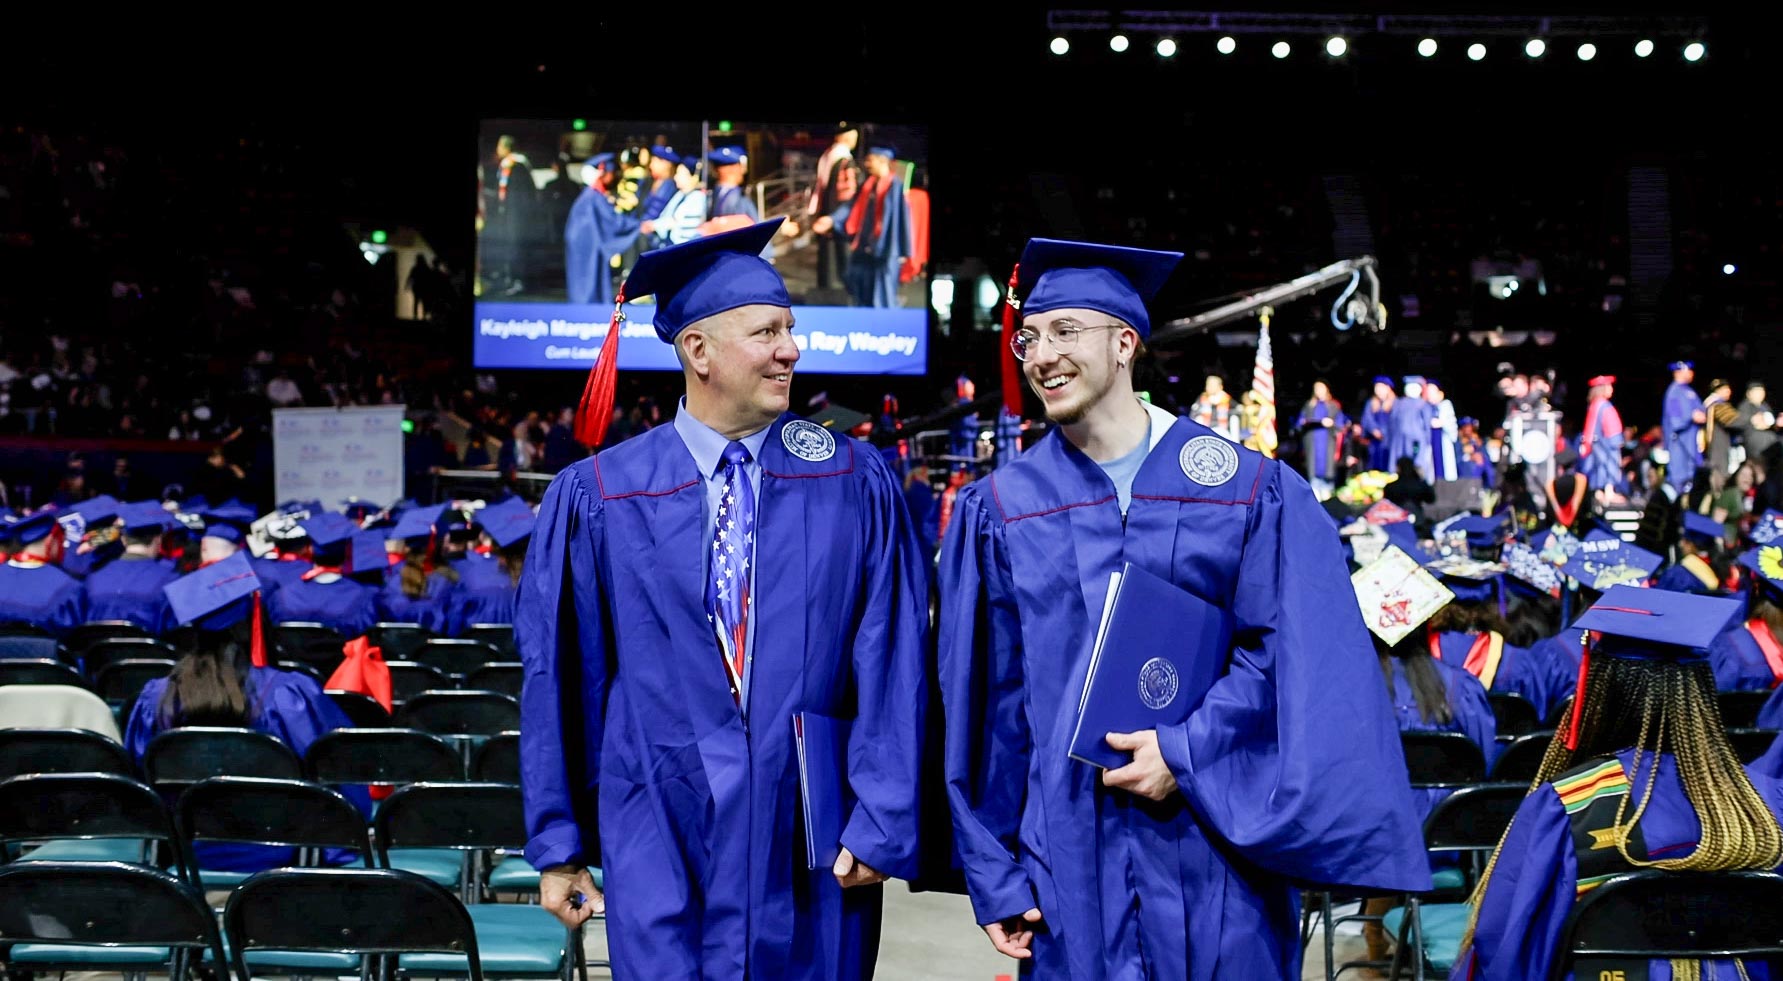 VIDEO: Father-son bond strengthened by shared graduation